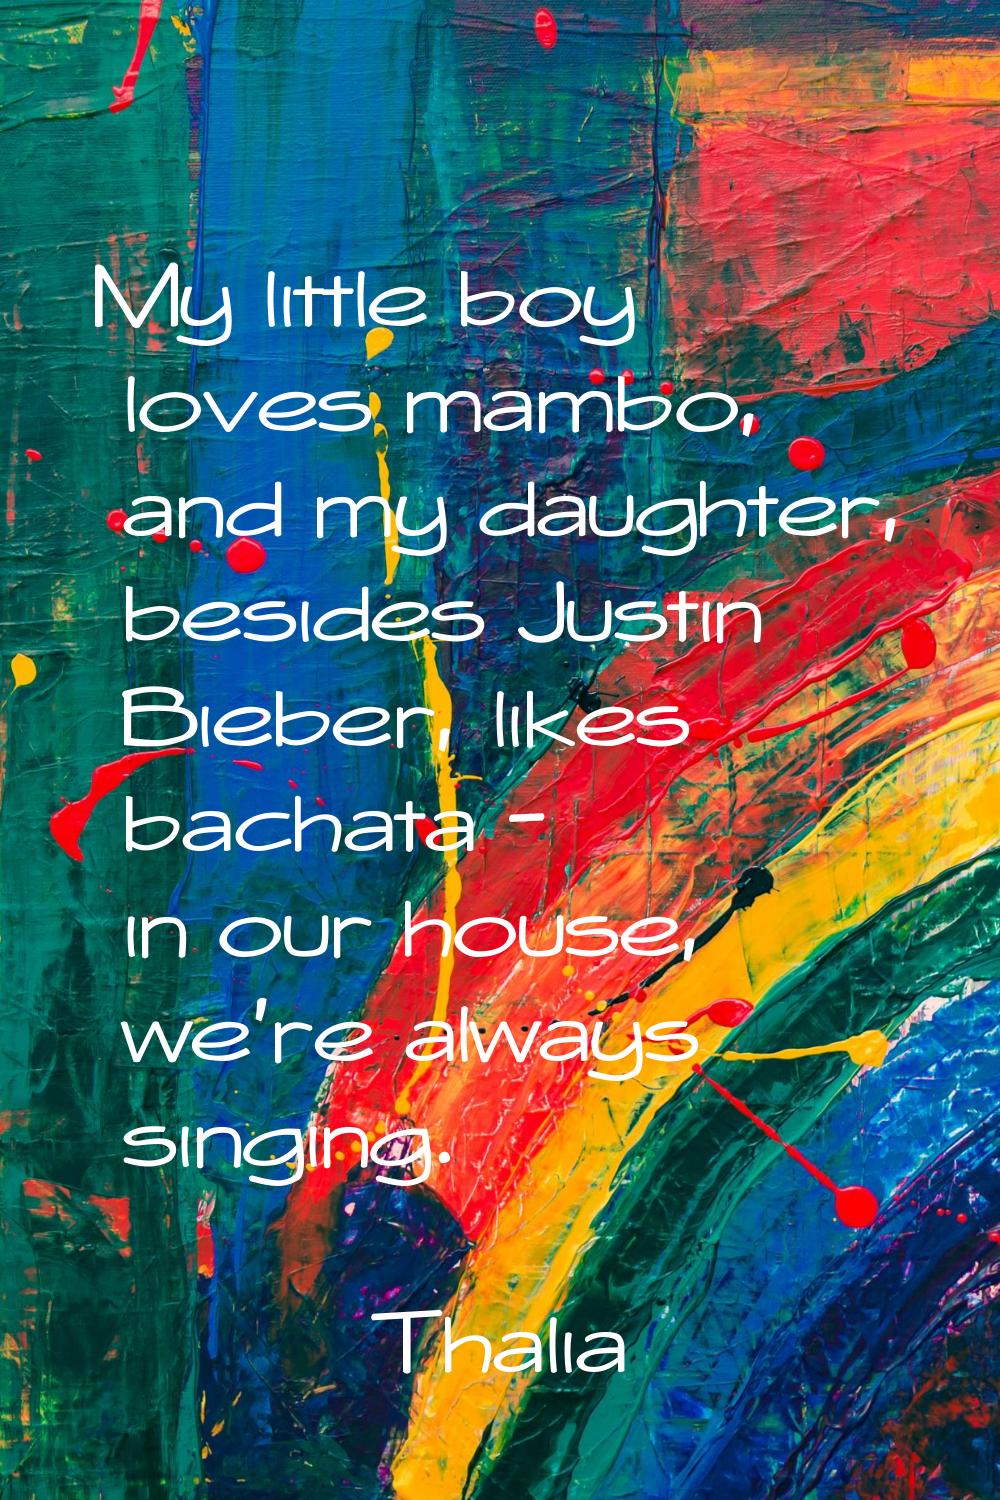 My little boy loves mambo, and my daughter, besides Justin Bieber, likes bachata - in our house, we